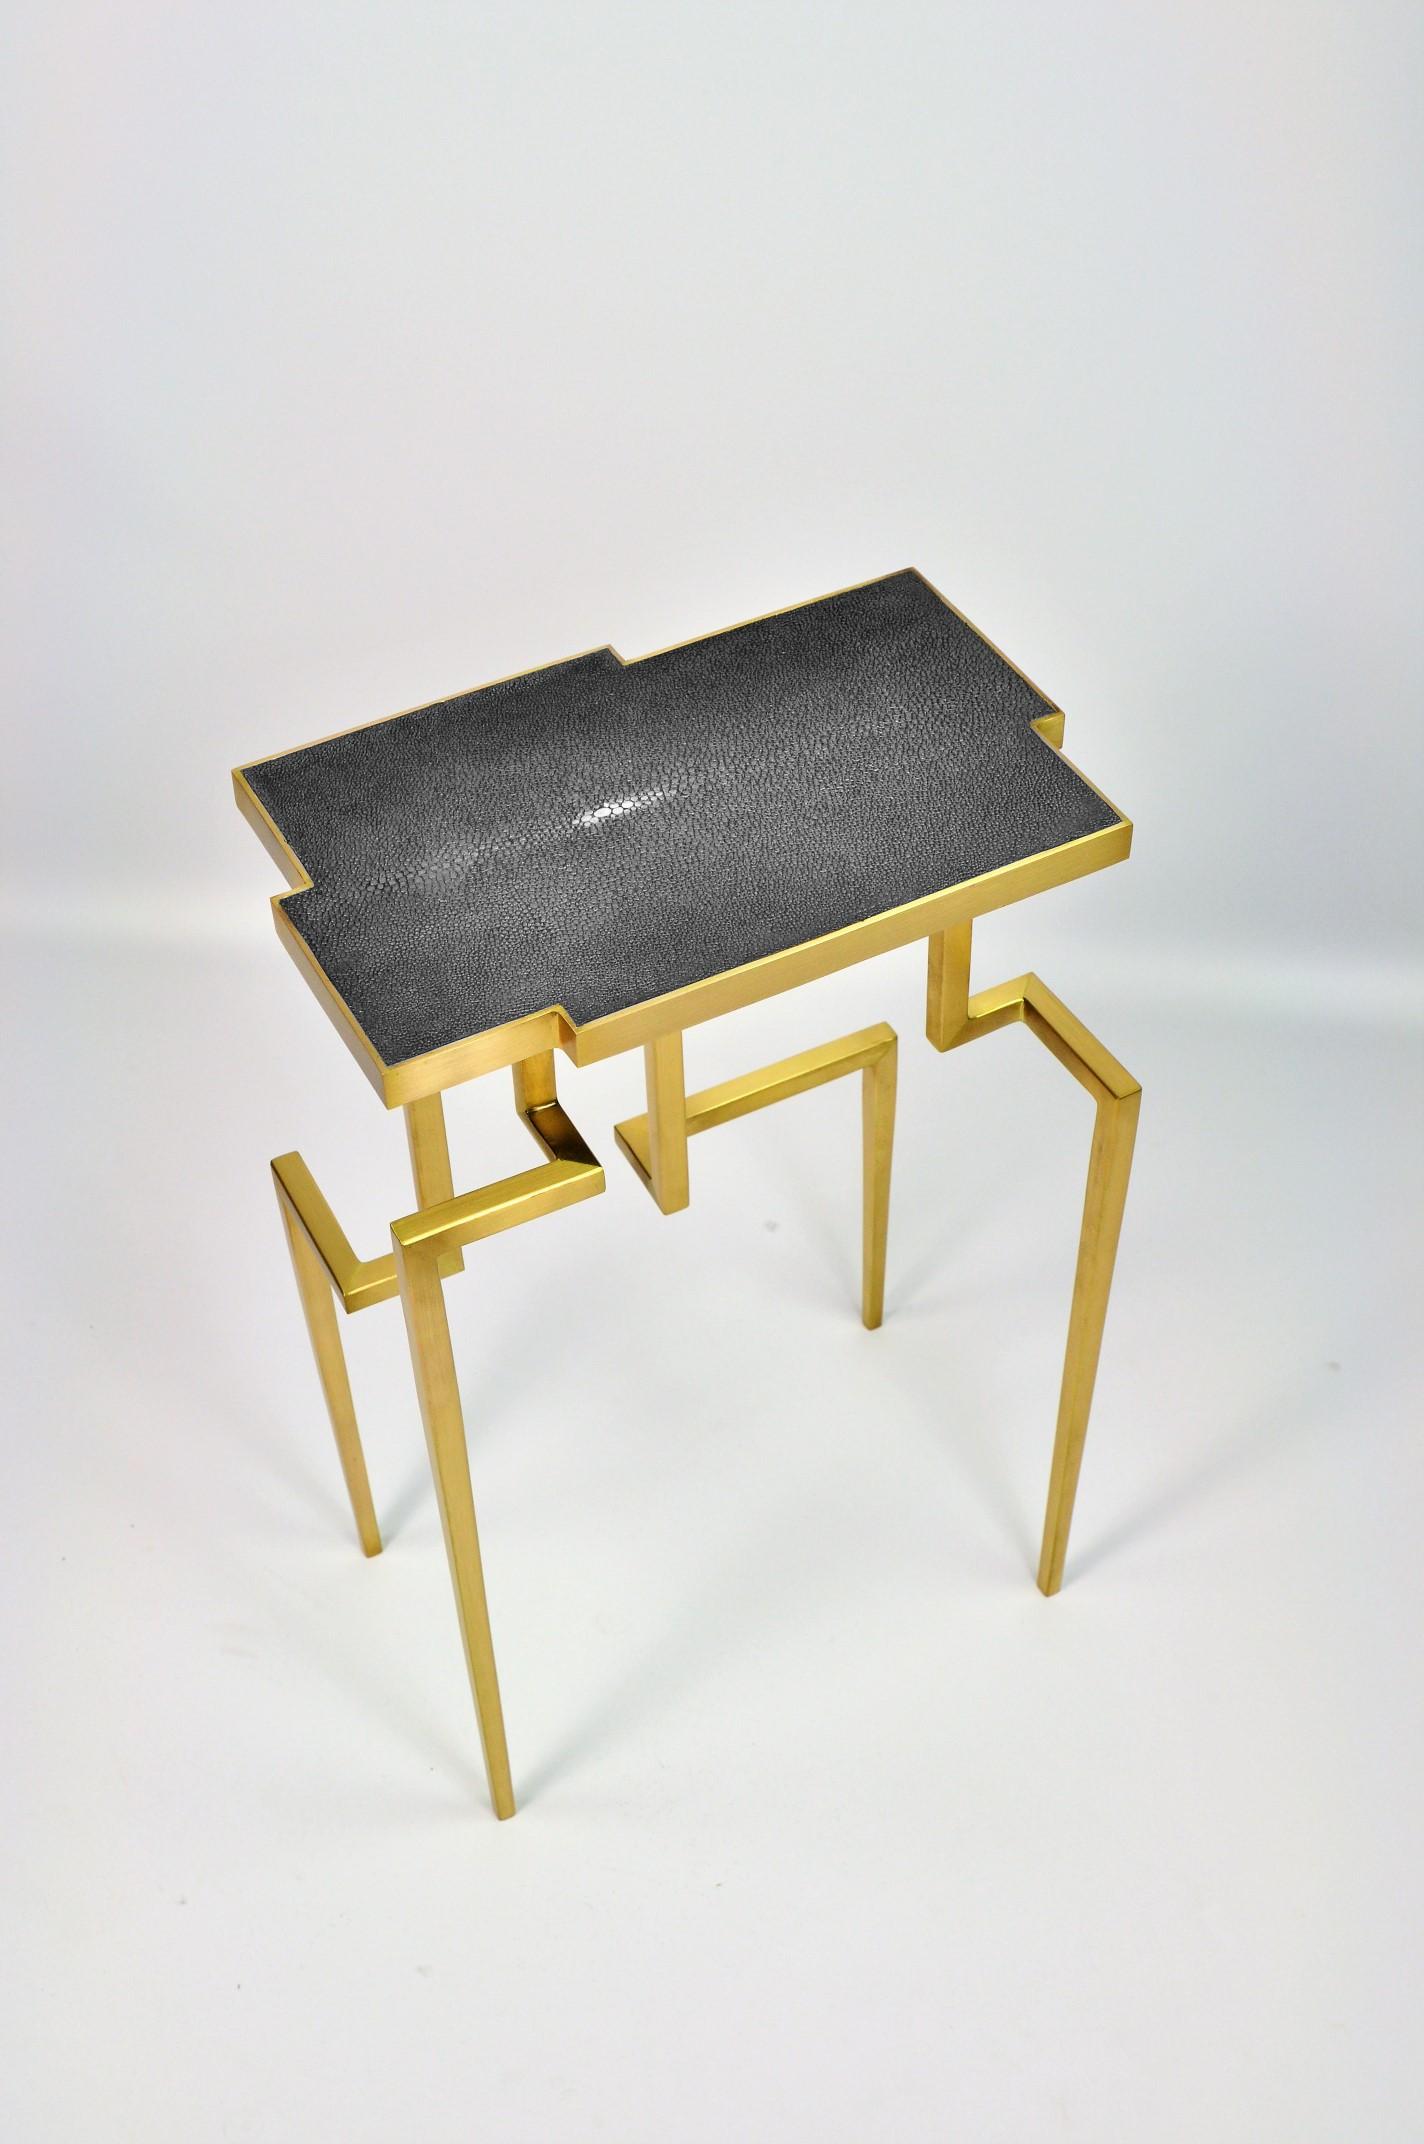 The PIXEL side table is made of solid brass with a genuine shagreen top.
The brass has been brushed to give a modern and soft aspect.
This side table is very versatile and can be placed anywhere in small or large room, near an armchair or as a